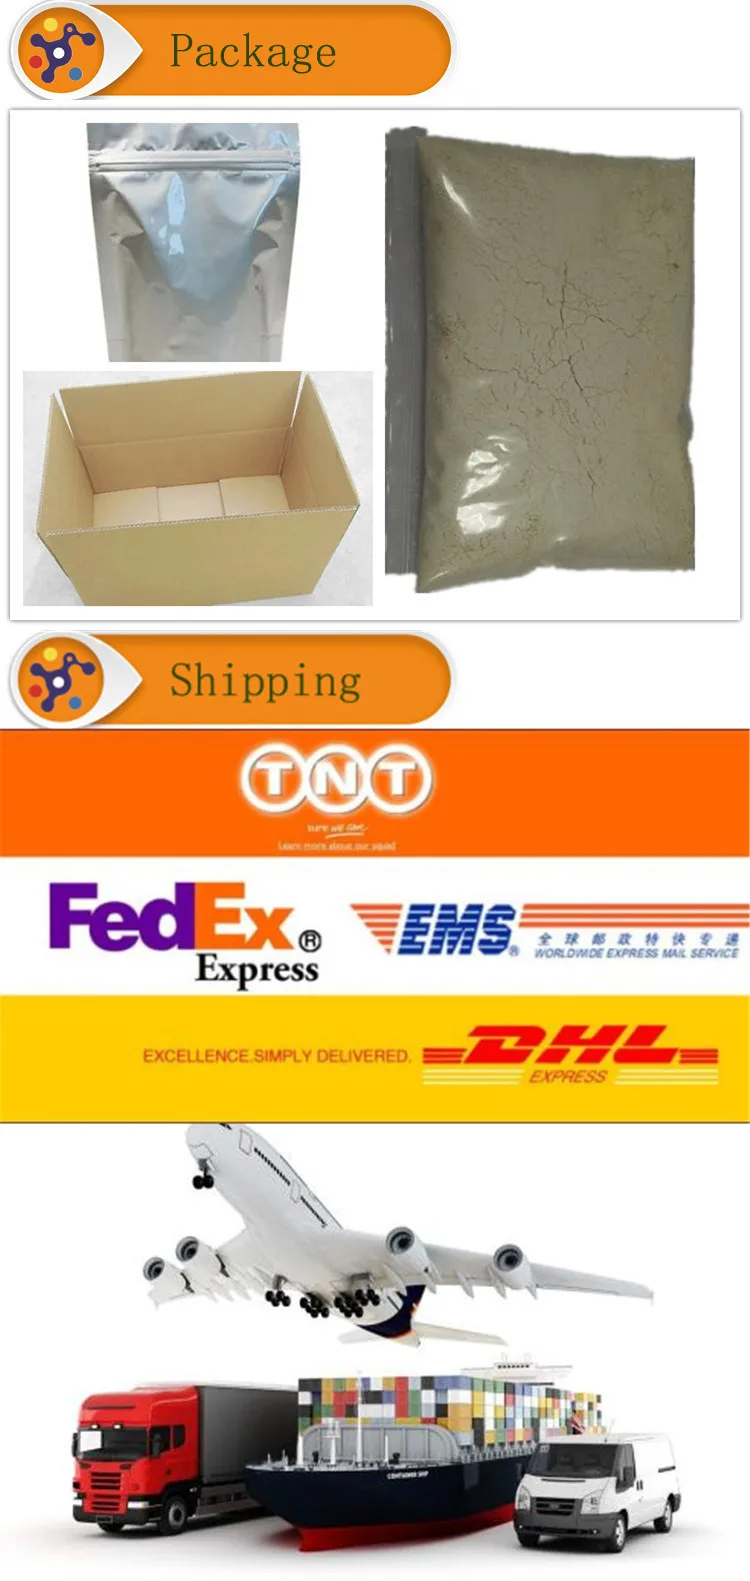 package&shipping2.jpg